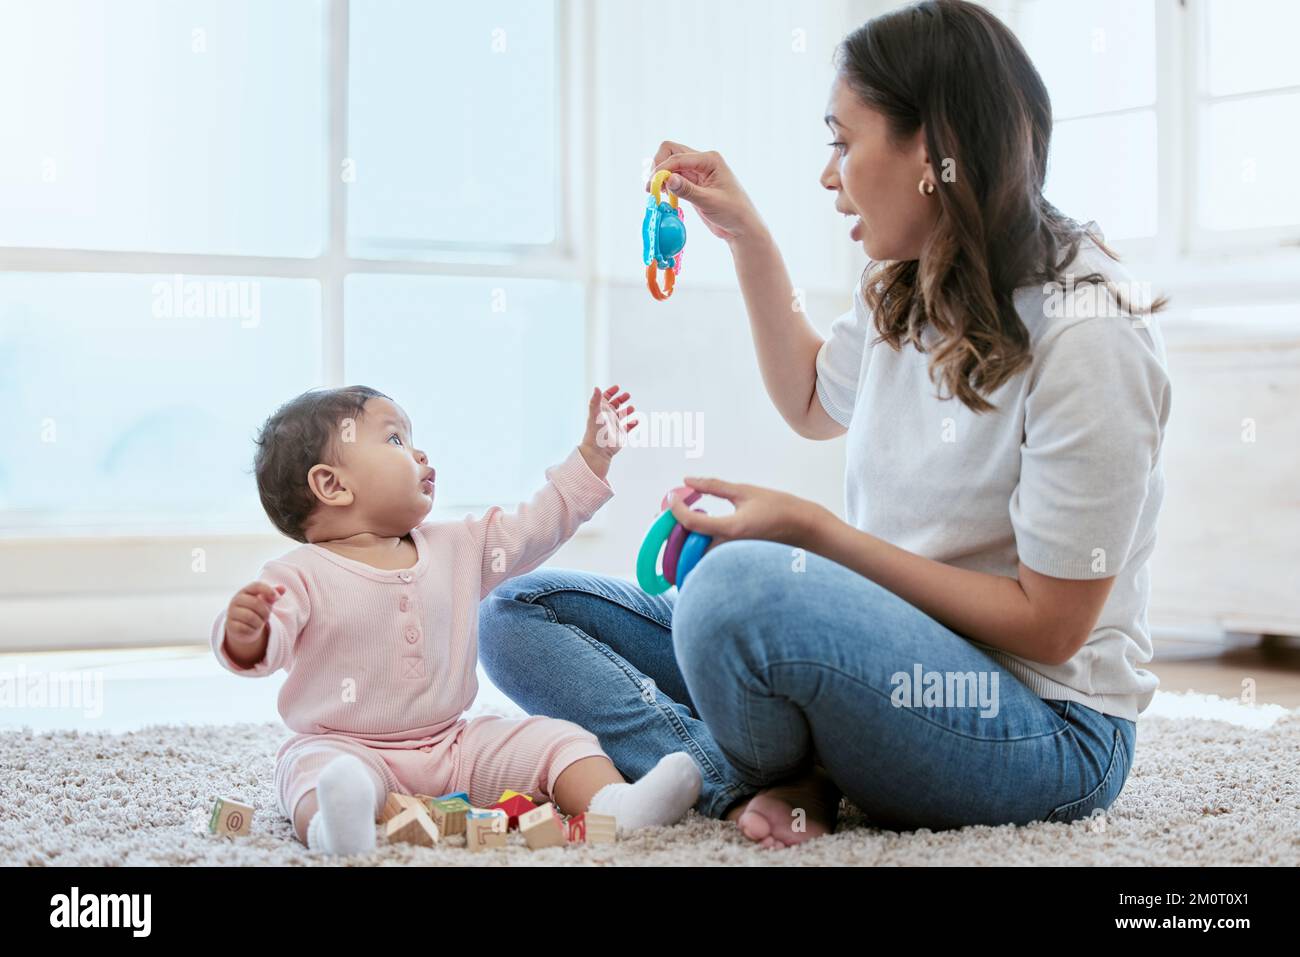 Give me that. a young mother bonding with her baby while sitting on the floor at home. Stock Photo